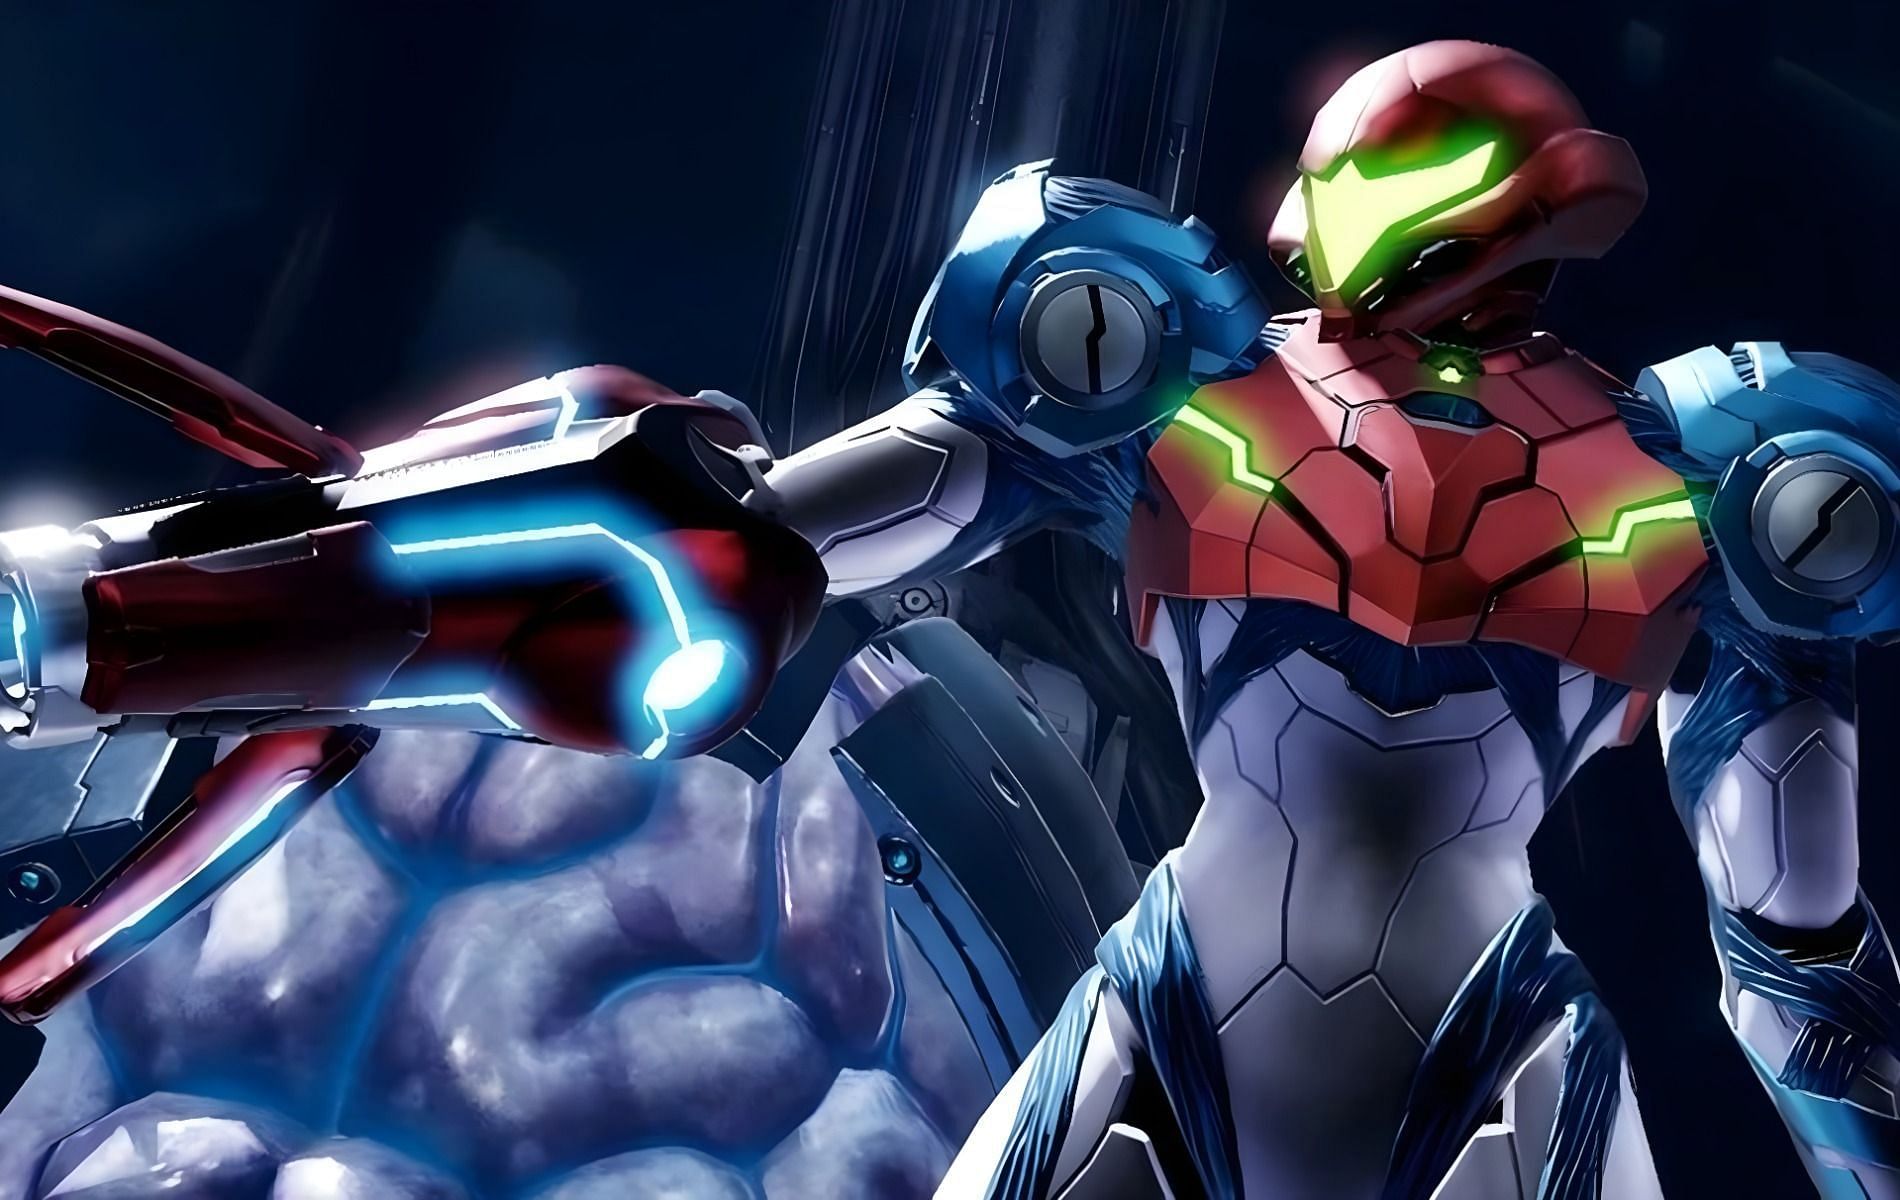 Metroid Dread version 2.1.0 (released April 7, 2022) official notes bring three new modes (Image via Metroid Dread)